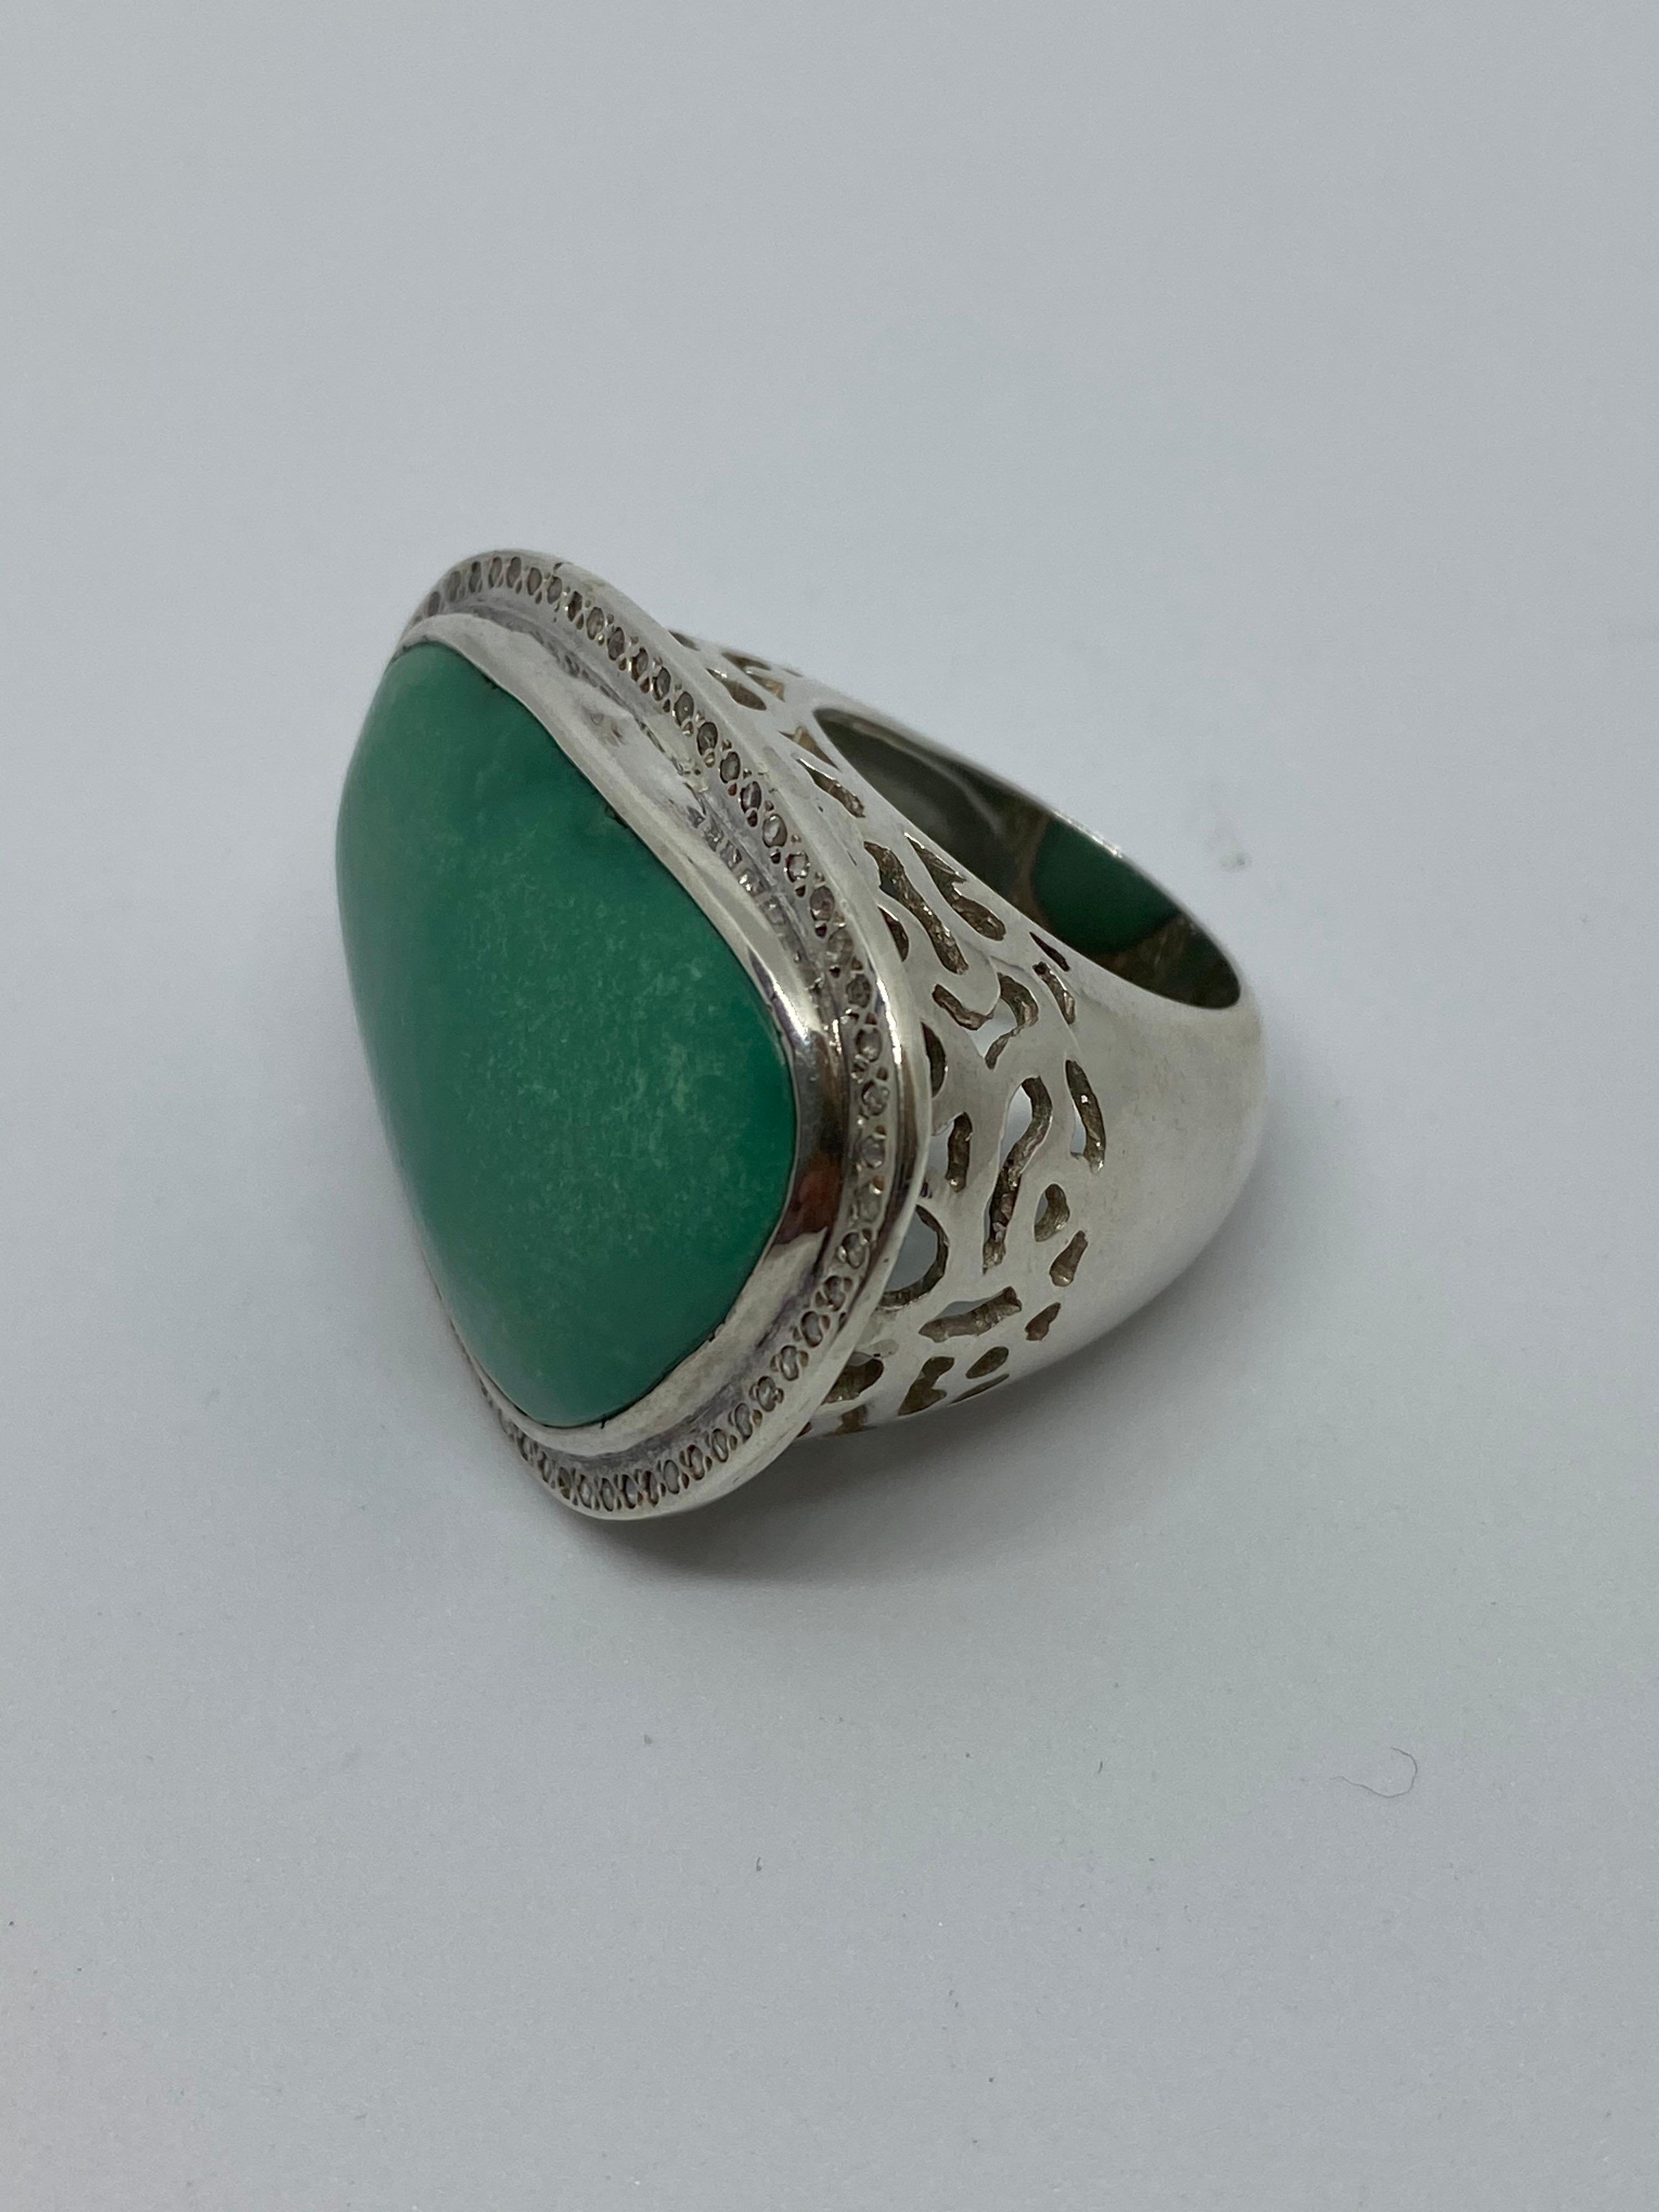 This is a very large free-formed Dyed Turquoise Ring that is bezel set with tiny Rose Cut Diamonds around the bezel. It sits on an open gallery cut out of Sterling Silver. Fits a Finger size 7.5 US size. Measures 1.25 inches in length and  1.50